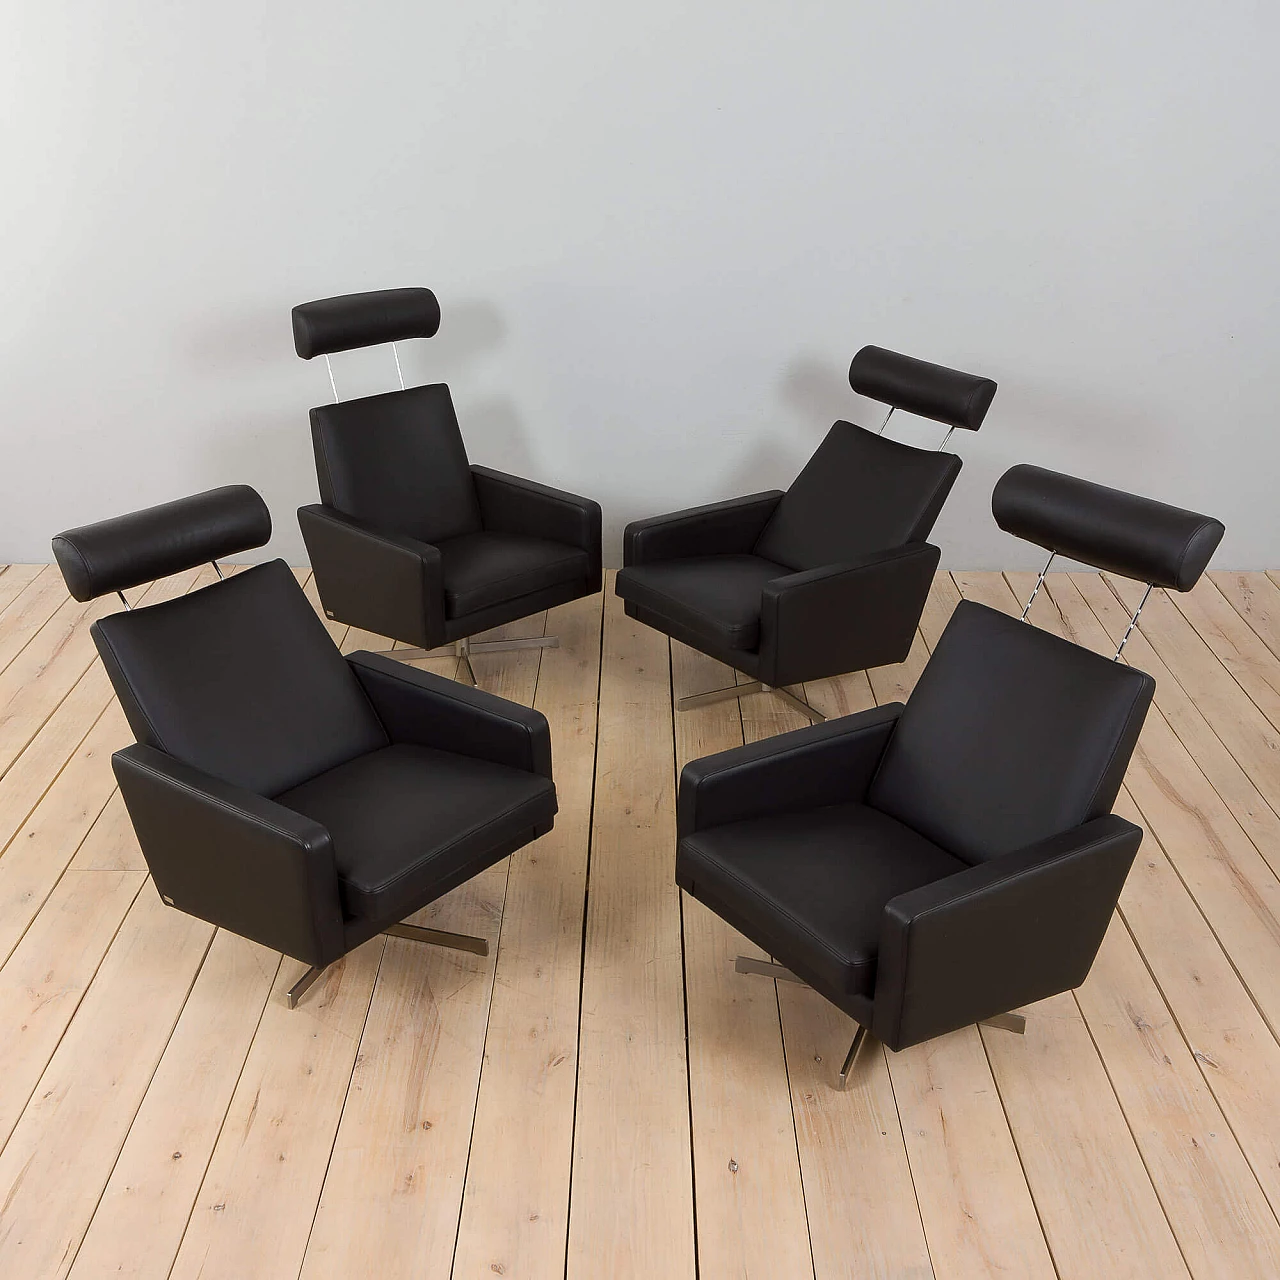 4 Recliner armchairs in black leather by Skipper, 1980s 1